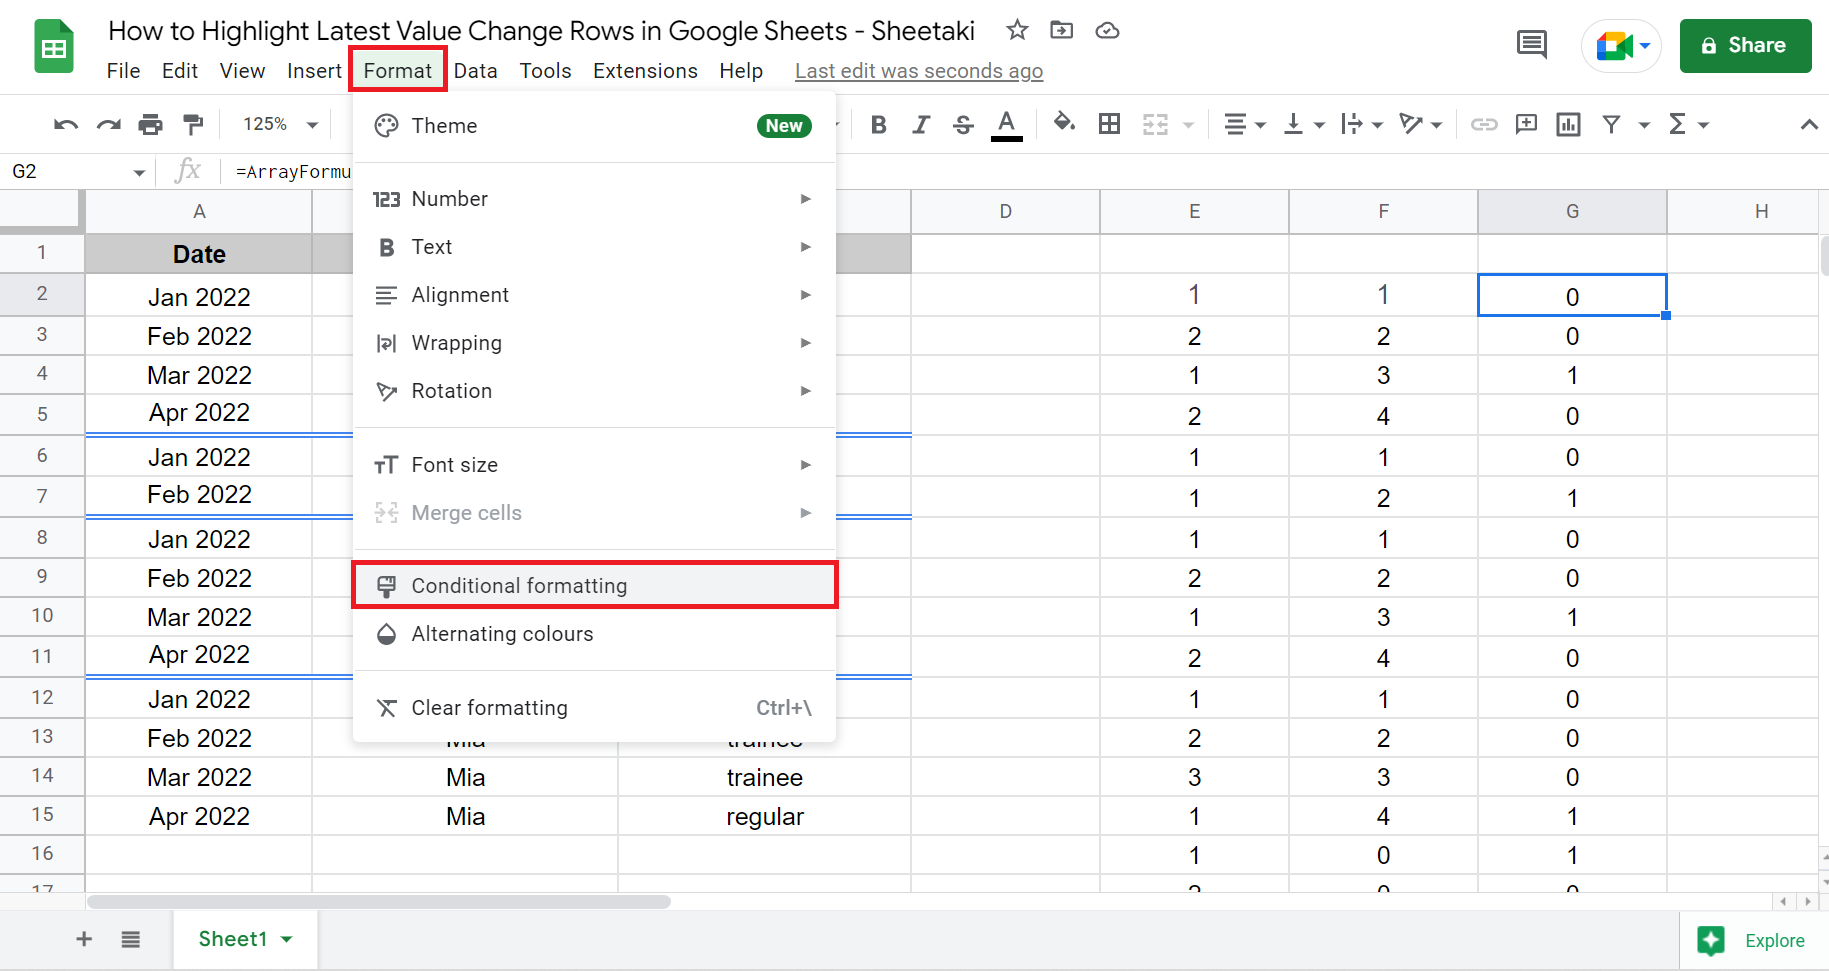 Highlight Latest Value Change Rows in Google Sheets